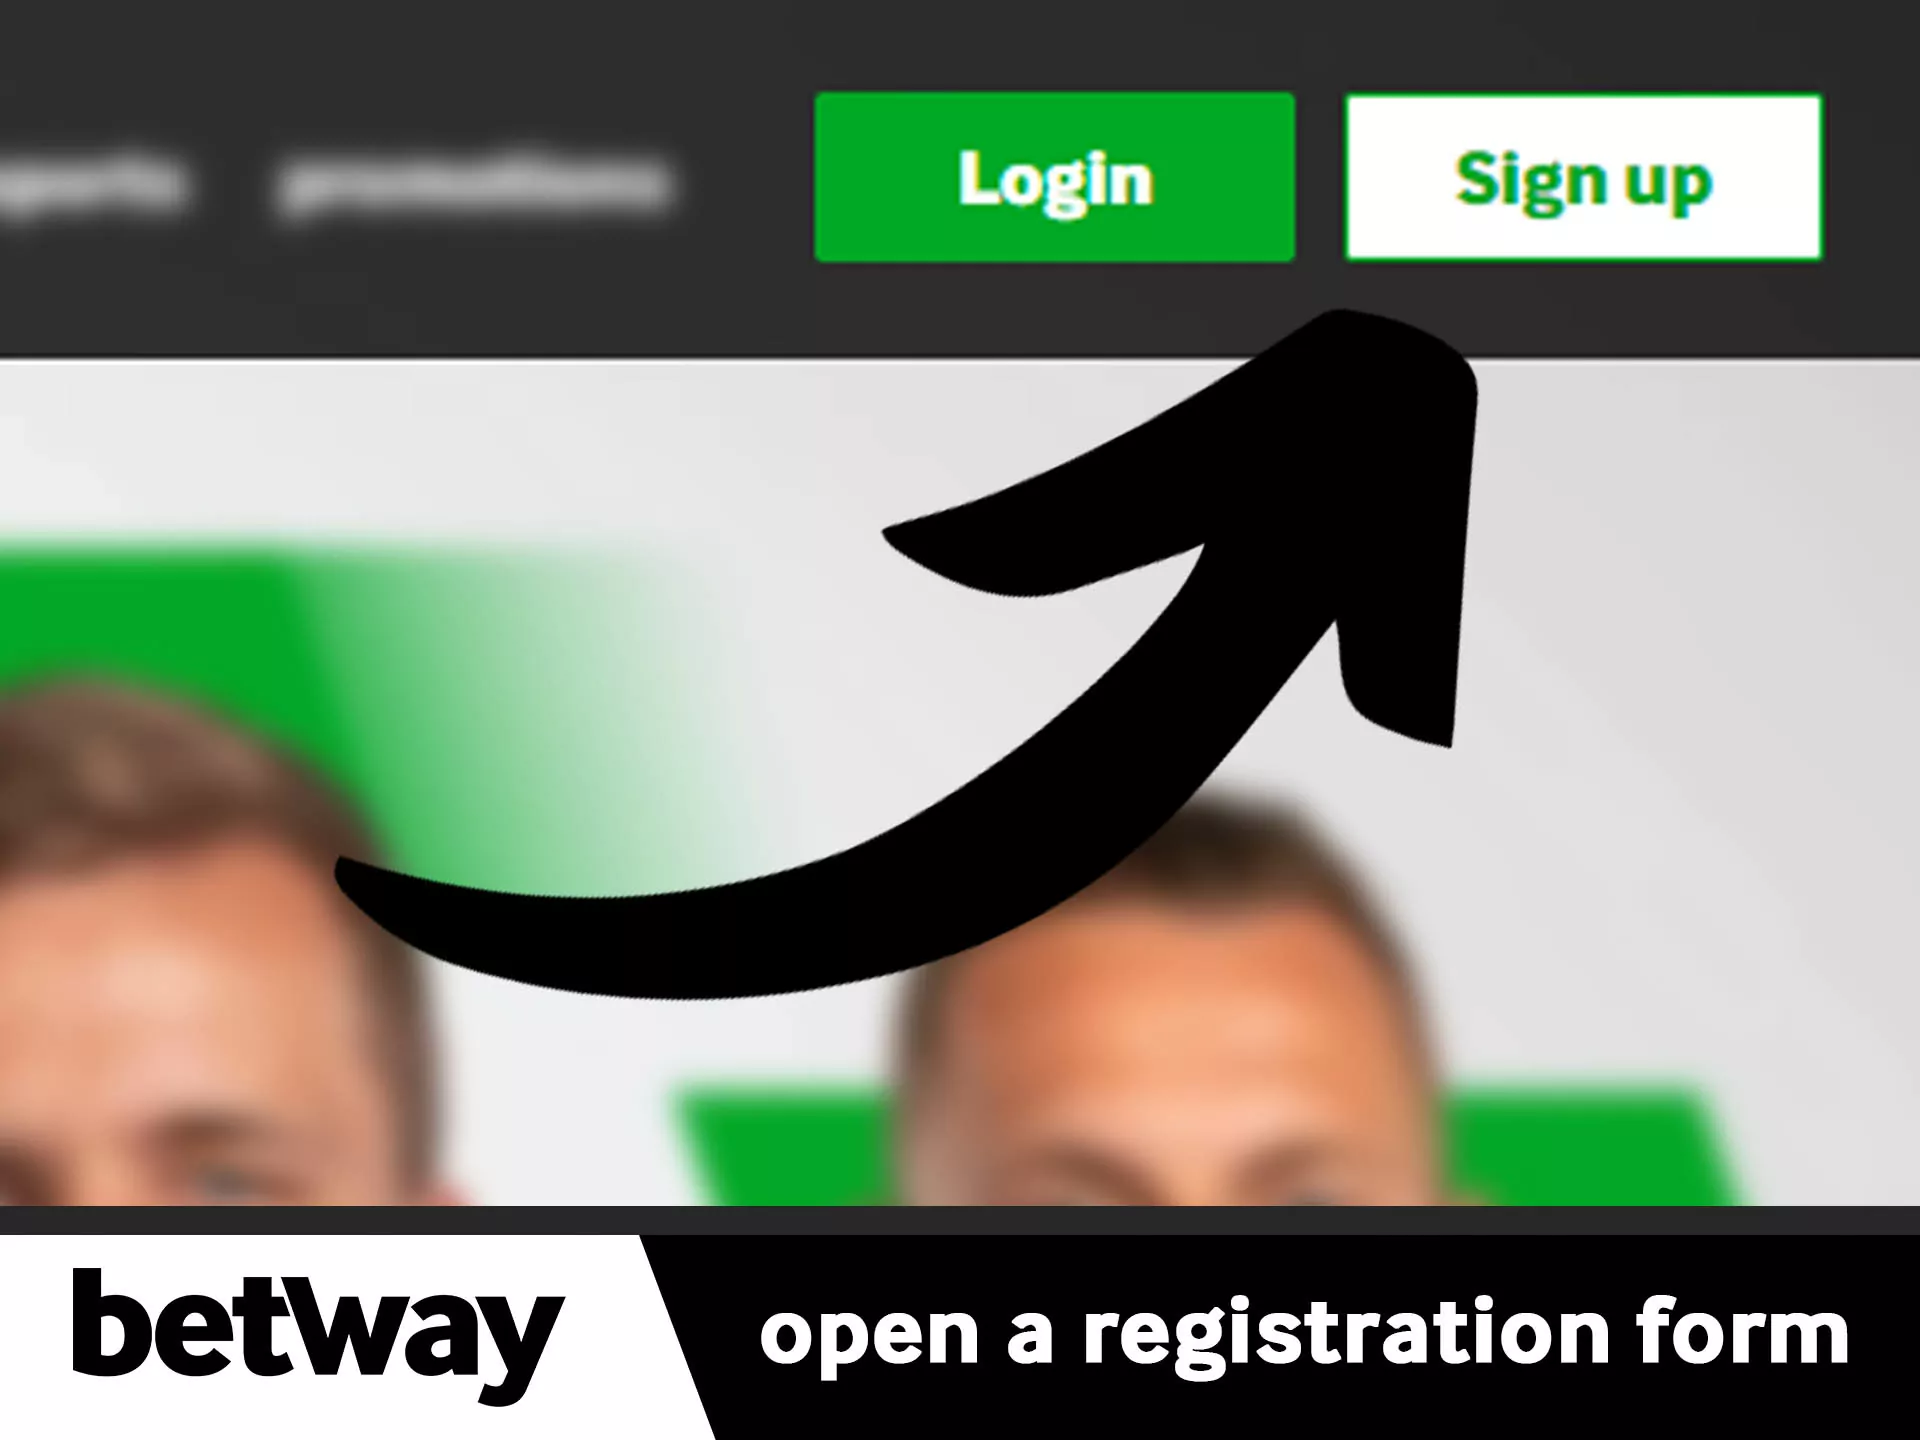 Click on sign up button for start registration.